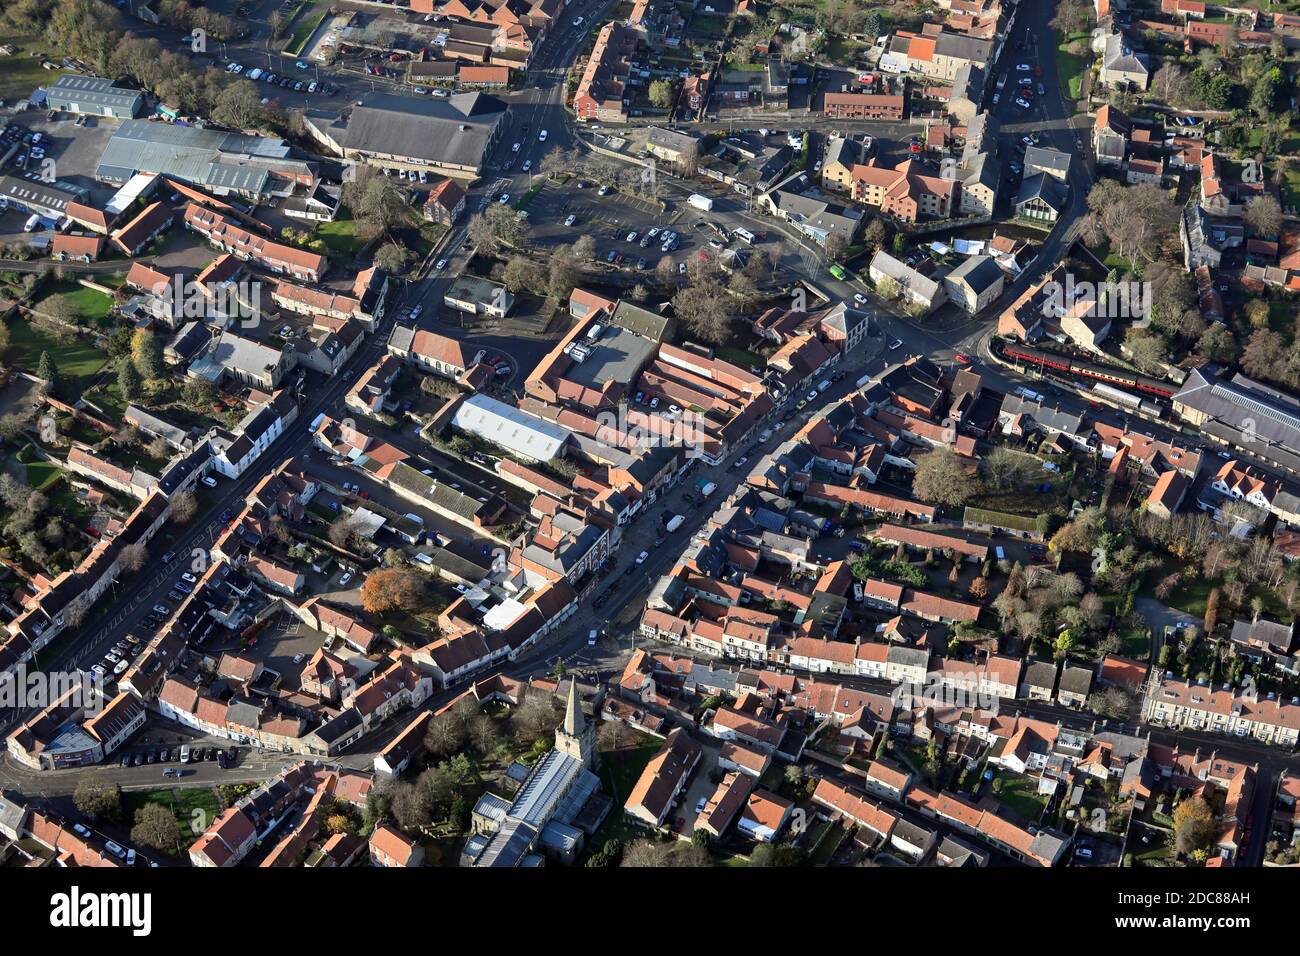 aerial view of Pickering town centre: the A170 road Hungate, Market Place and the Malton road all visible. Stock Photo